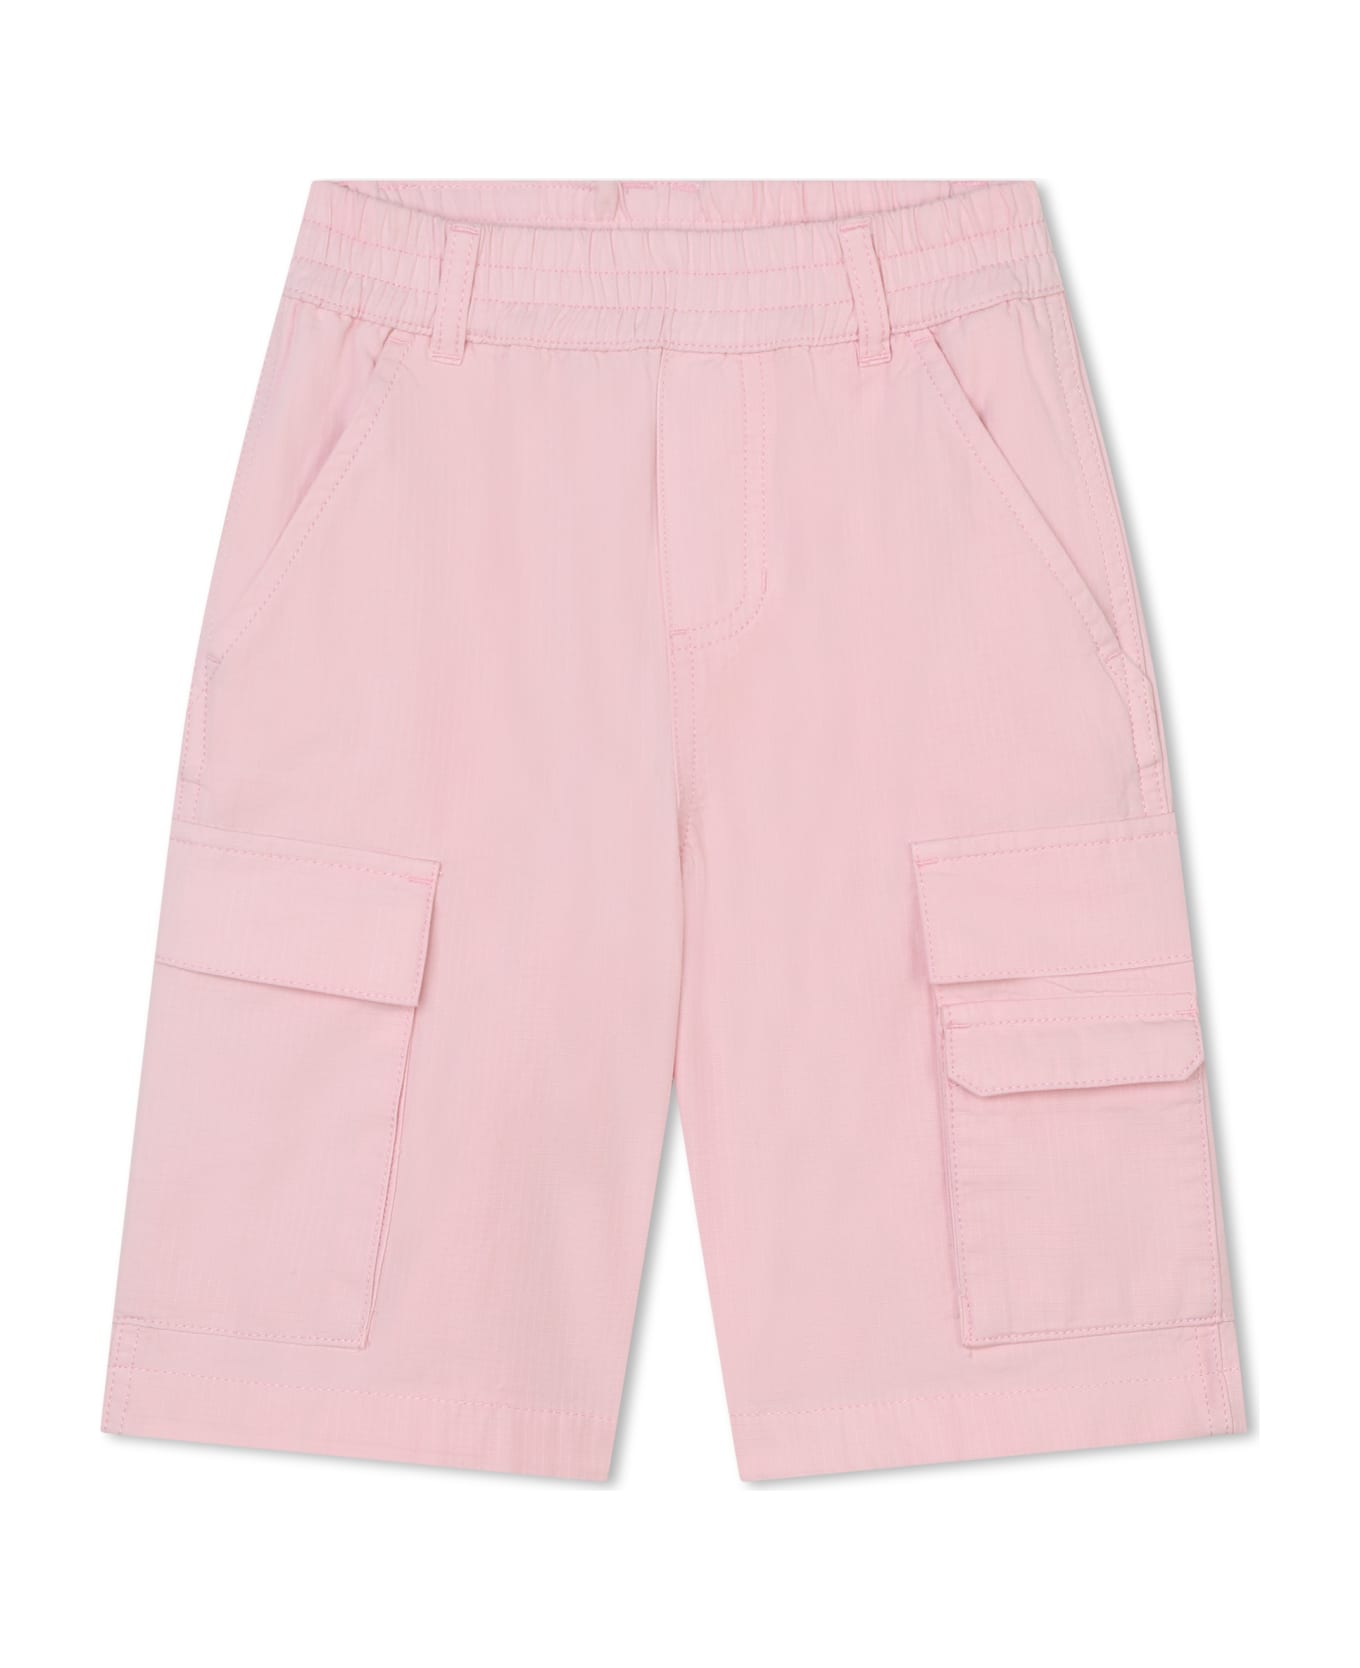 Marc Jacobs Bermuda Cargo - Pink ボトムス